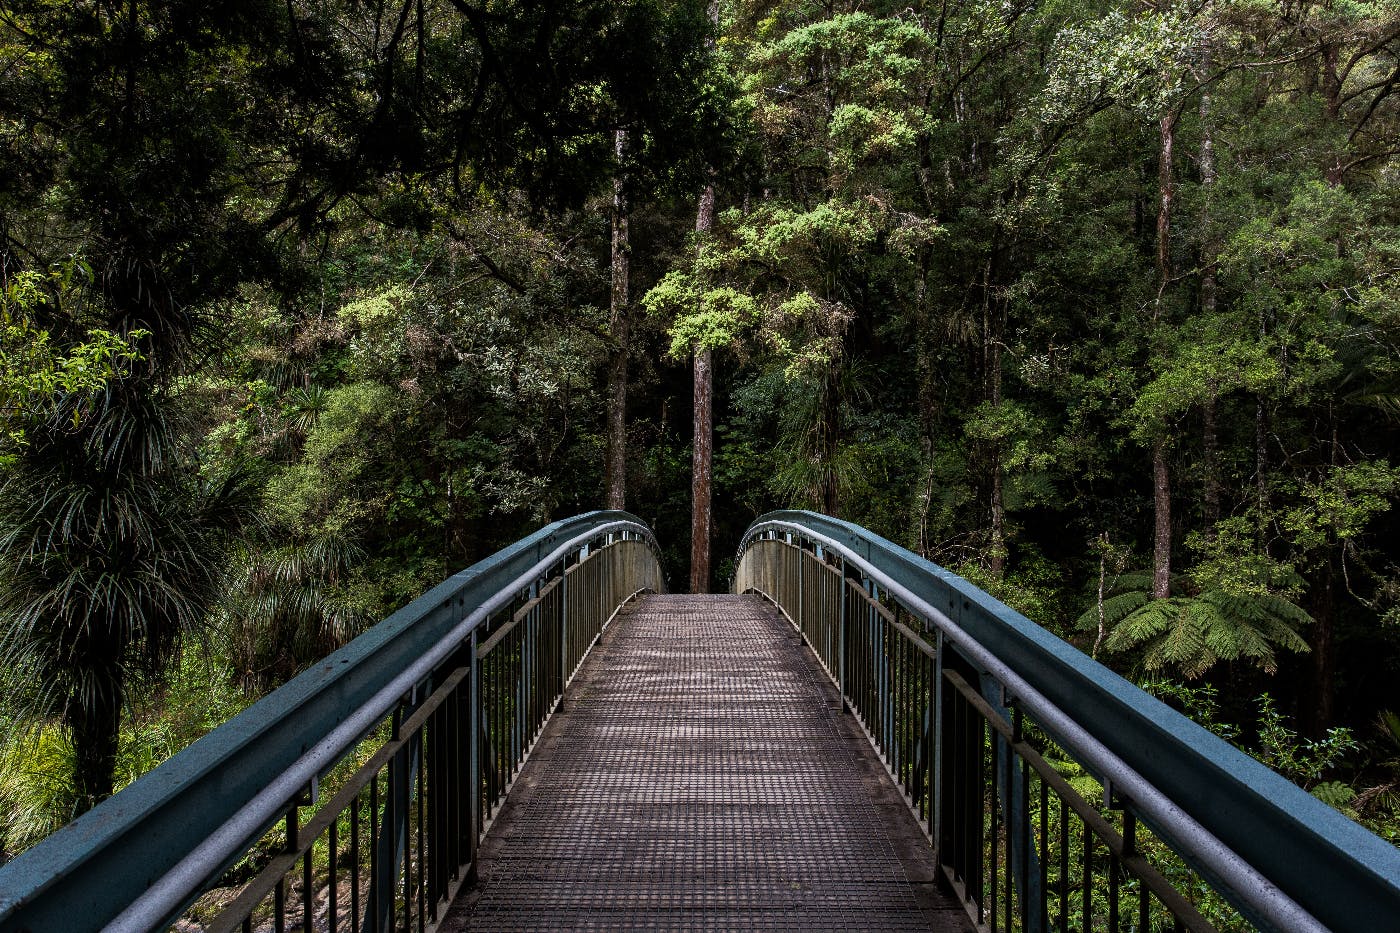 The arch of a footbridge disapprearing into the trees